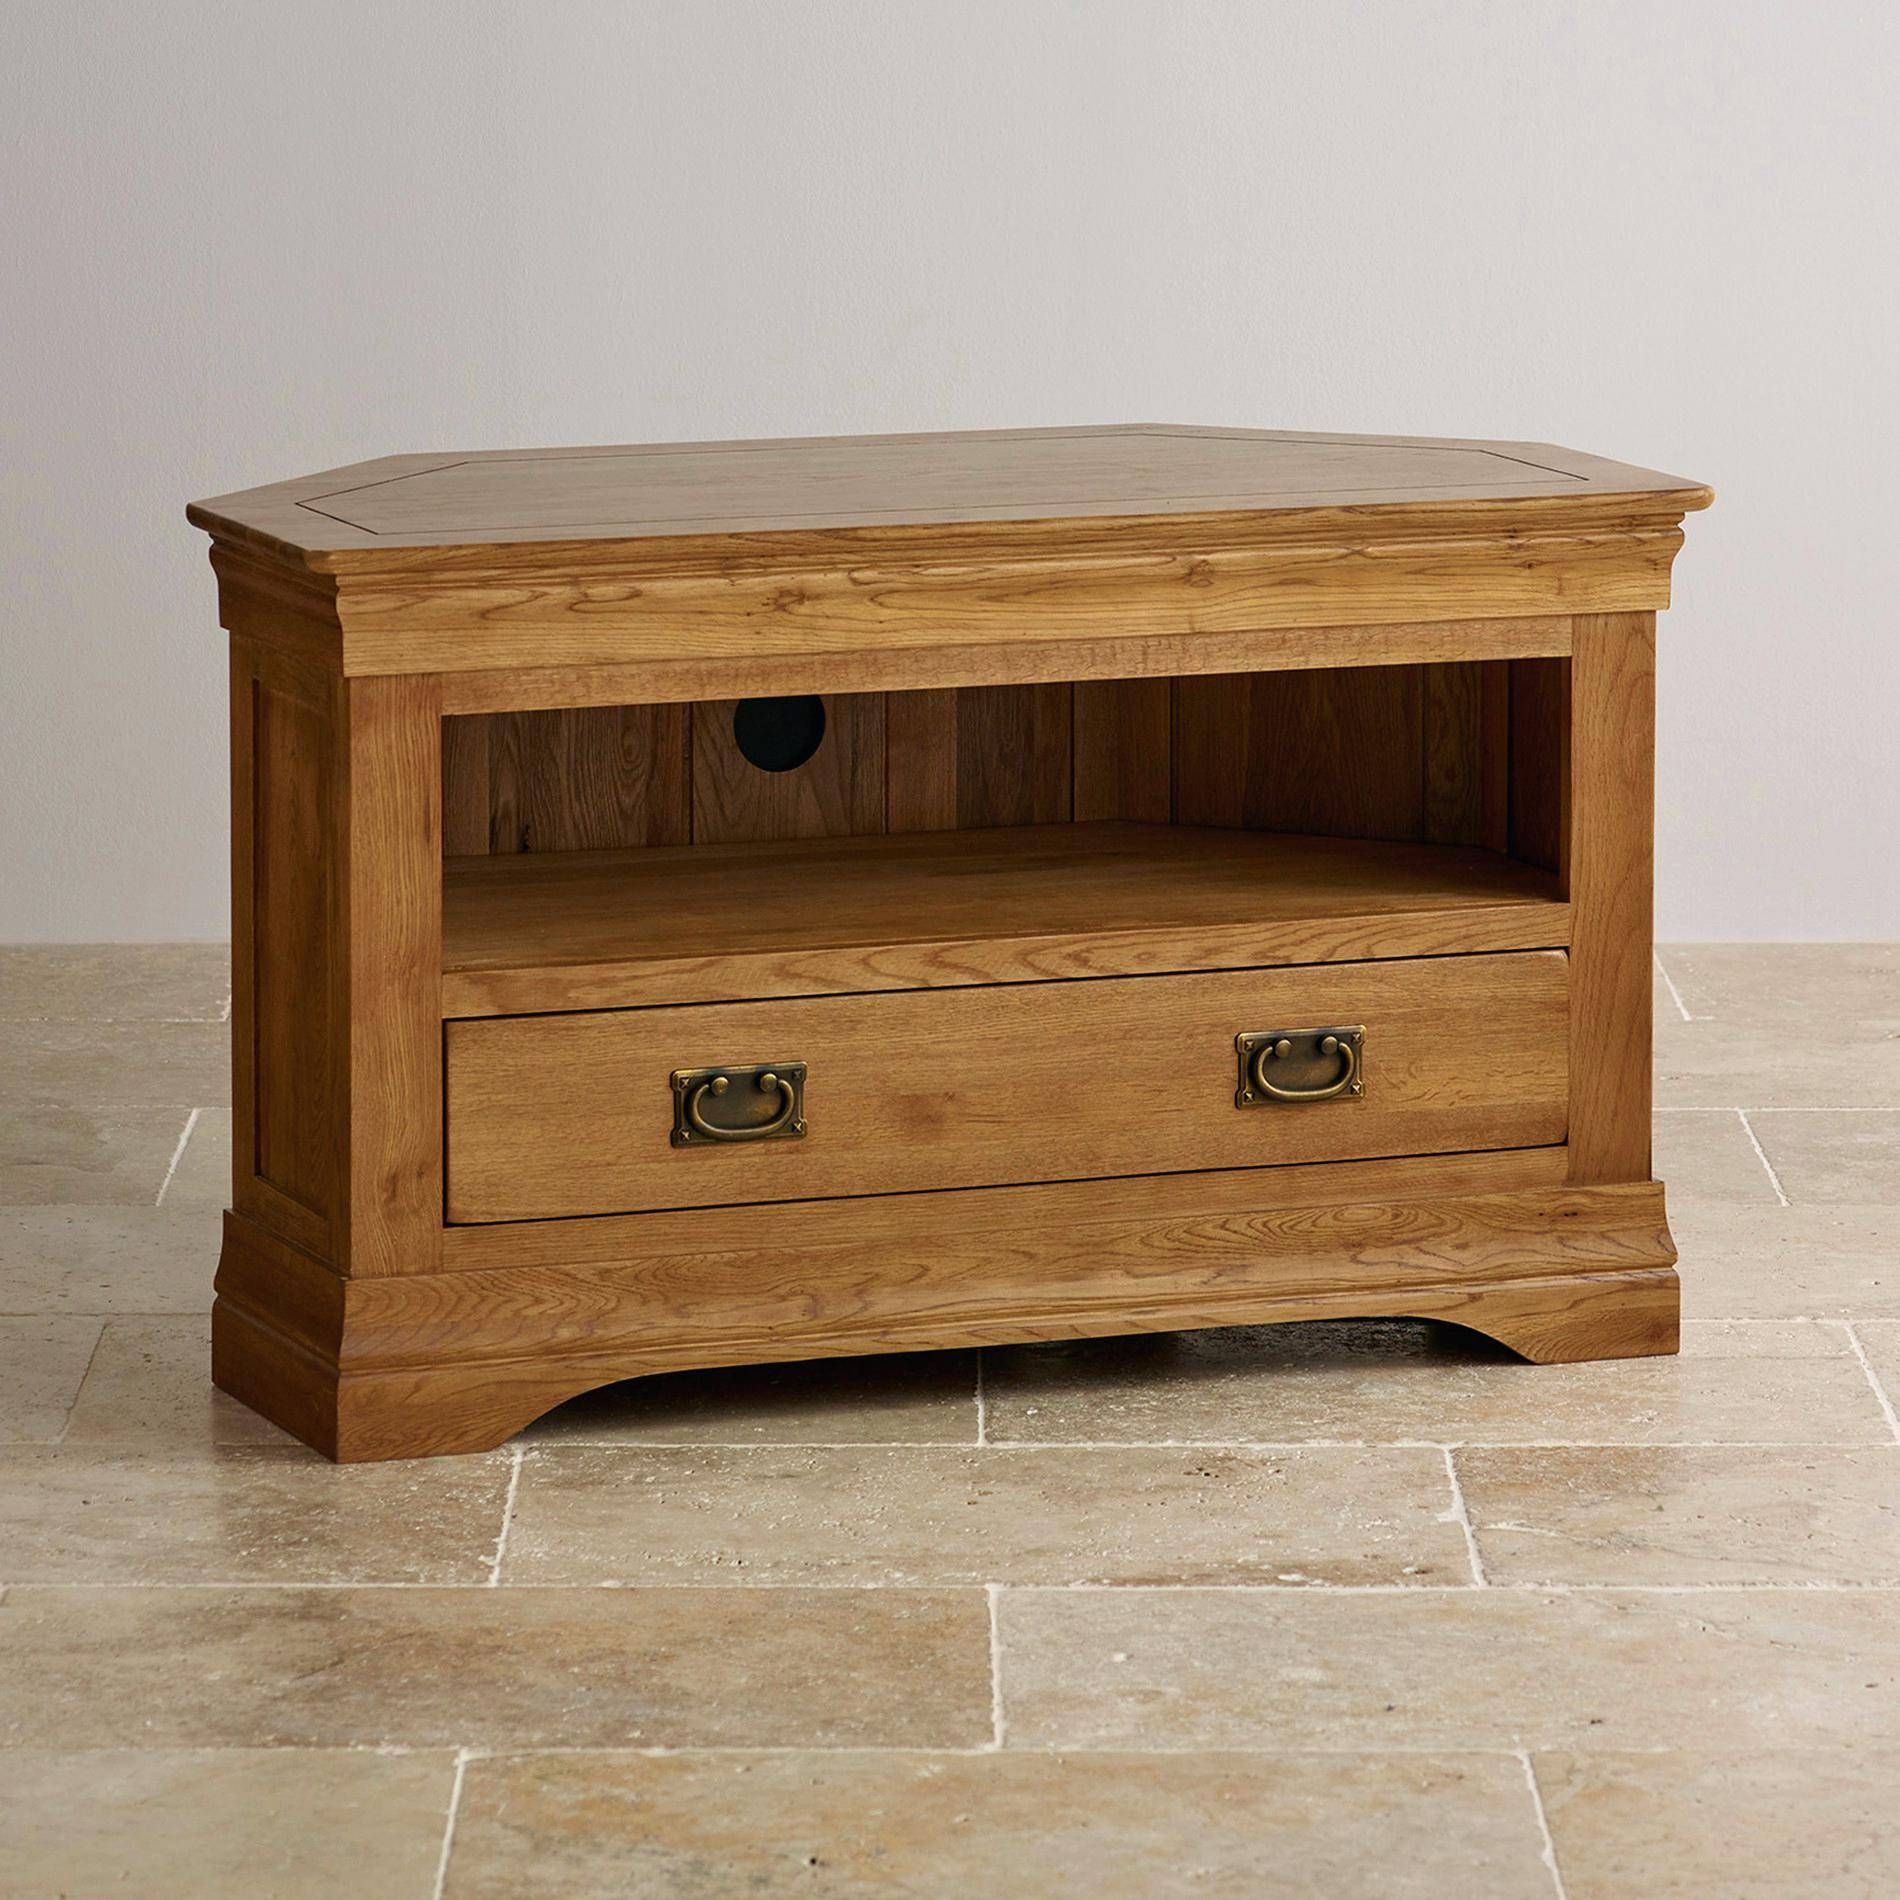 Tv Stand : Cool Rustic Oak Corner Tv Stand With Drawer Corner Oak Inside Oak Tv Cabinets For Flat Screens (View 13 of 15)